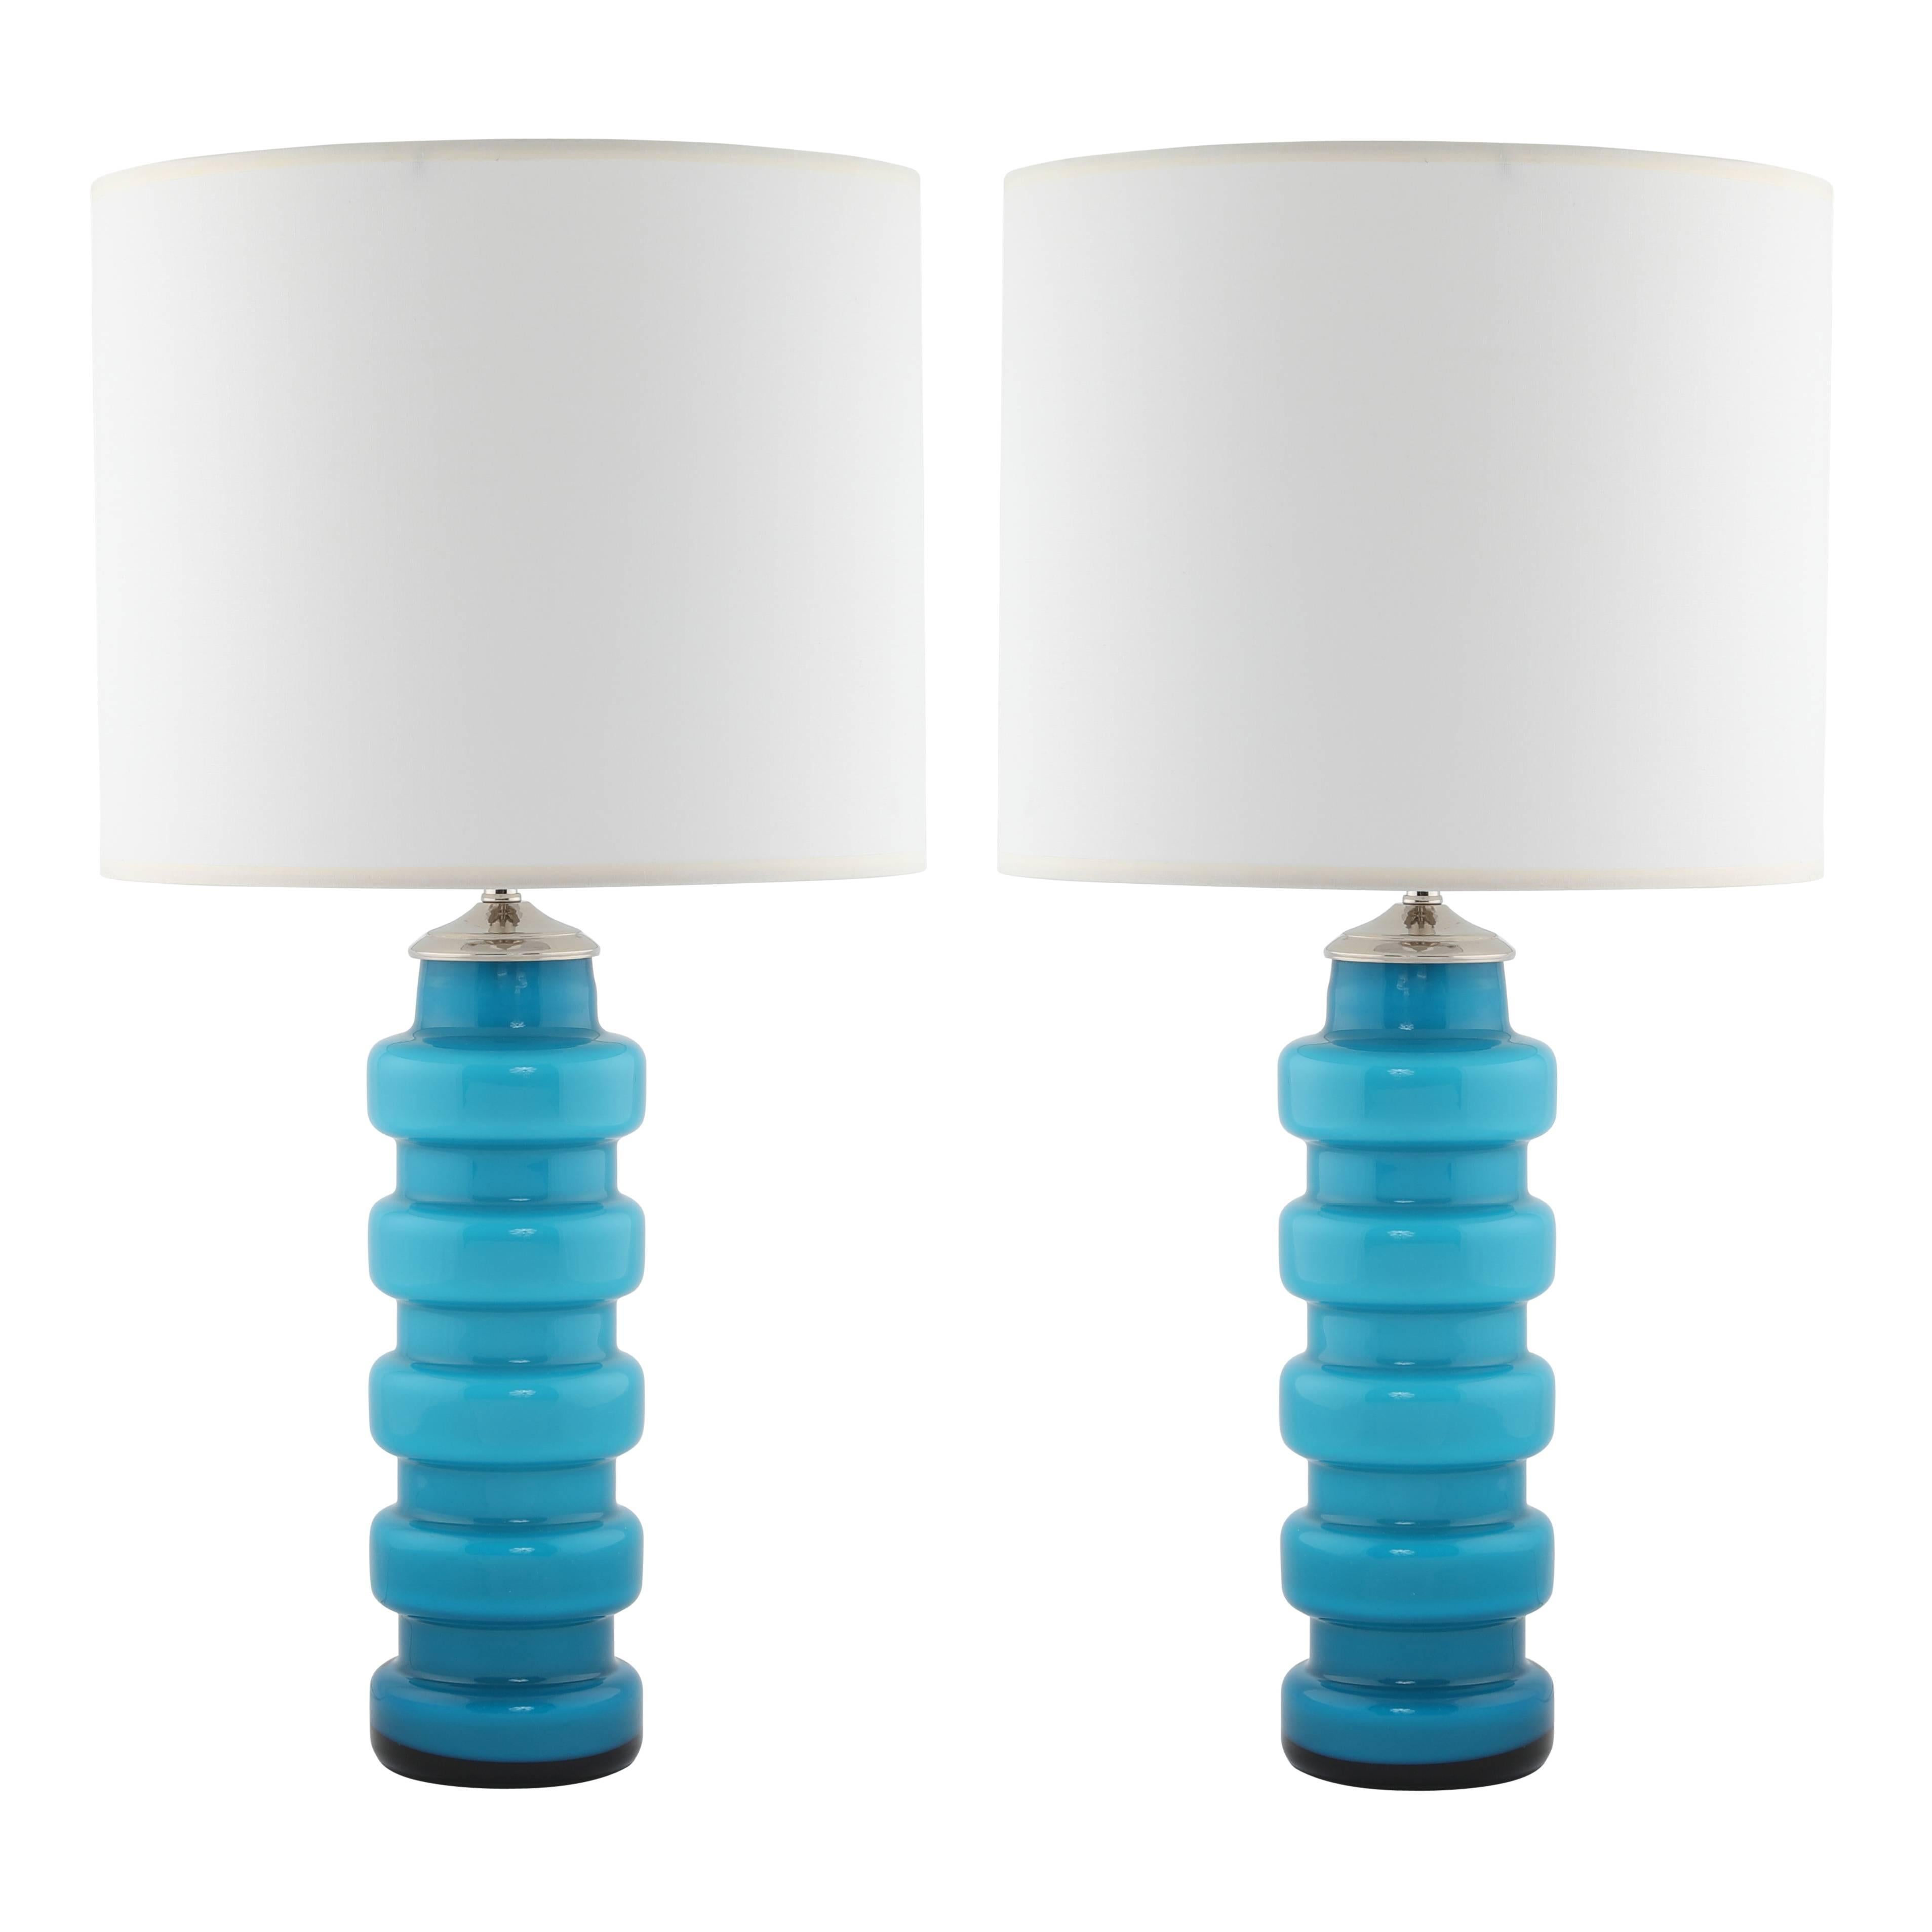 Blue Cased-Glass Table Lamps by Pers-Olof Ström for Alsterfors, circa 1960s